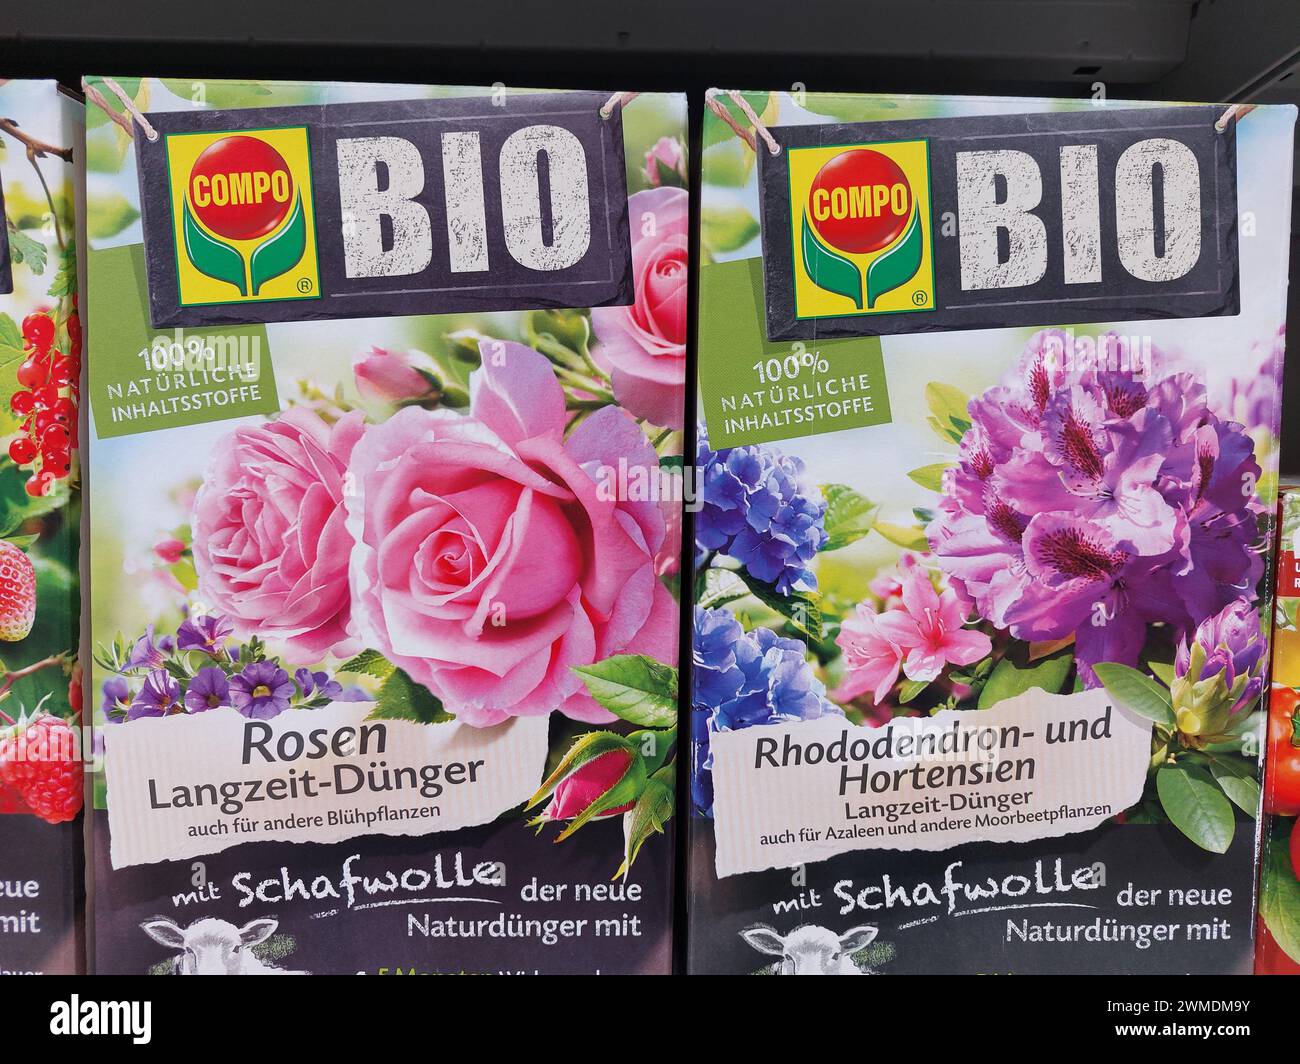 Compo fertilizer packs for rose flowers and rhododendron and hydrangeain plants a supermarket Stock Photo